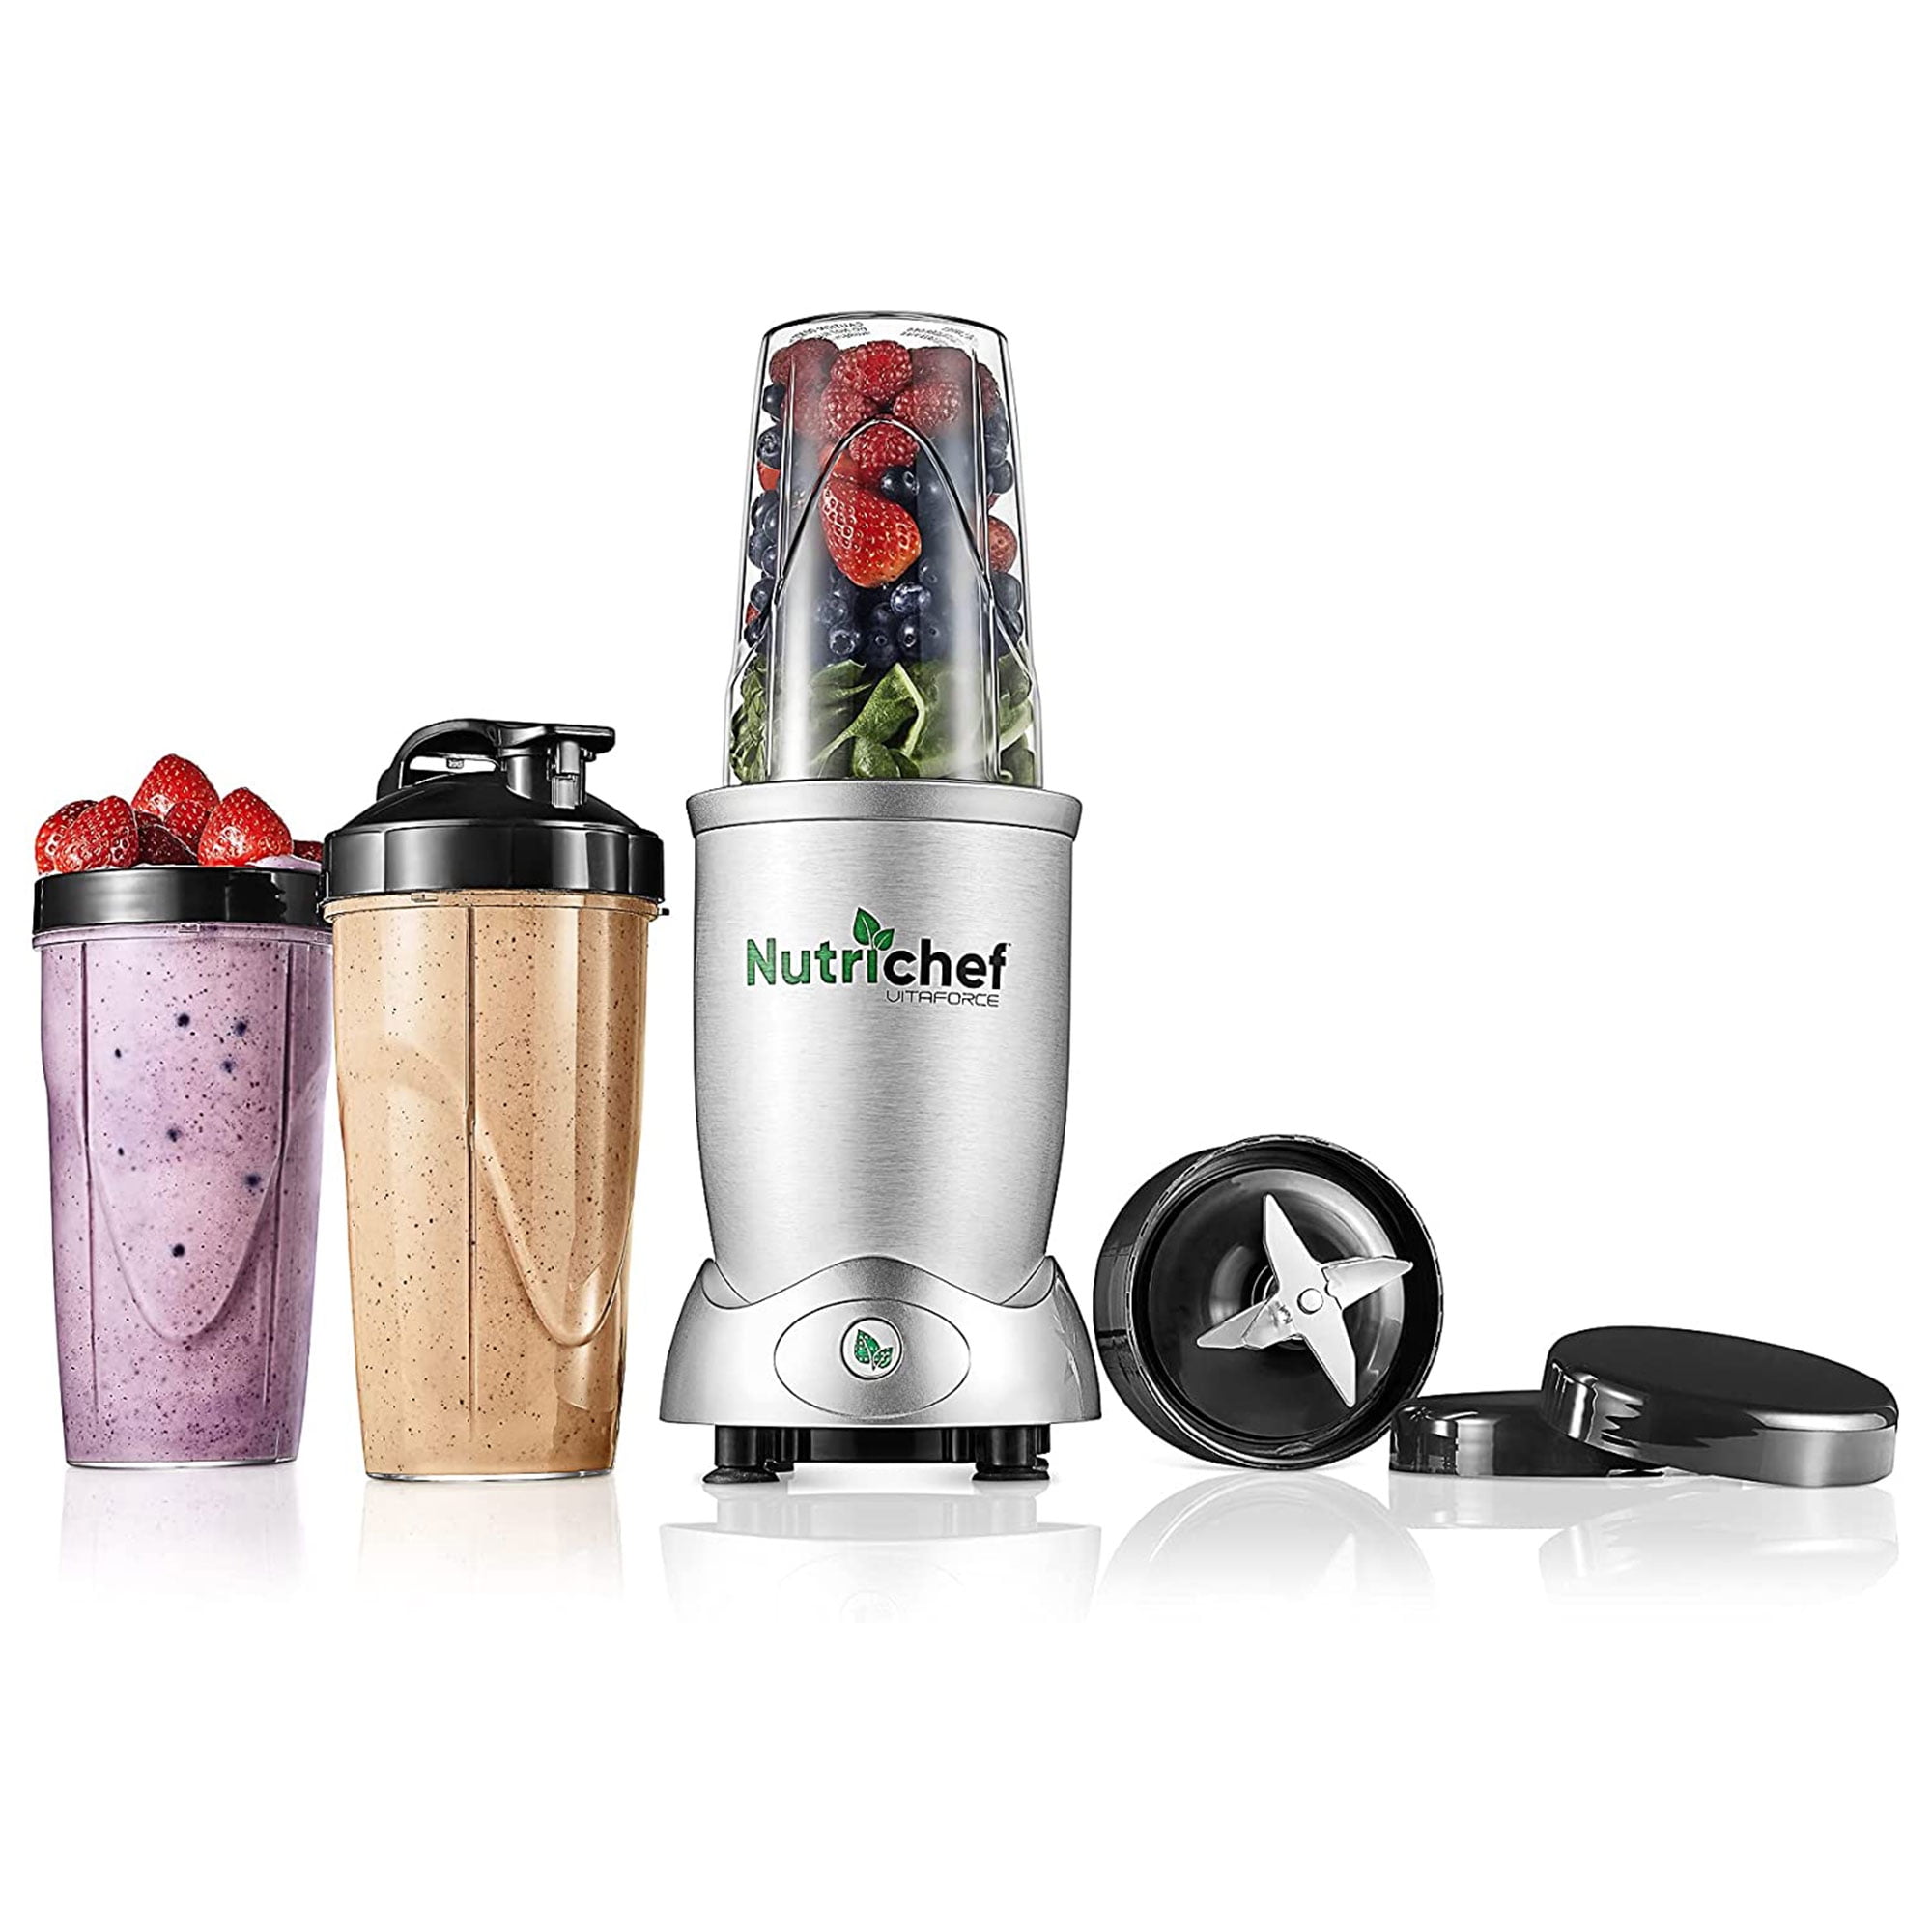 Personal Electric Single Serve Blender - 600W Professional Kitchen  Countertop Mini Blender-for Shakes and Smoothies w/Pulse Blend, Convenient